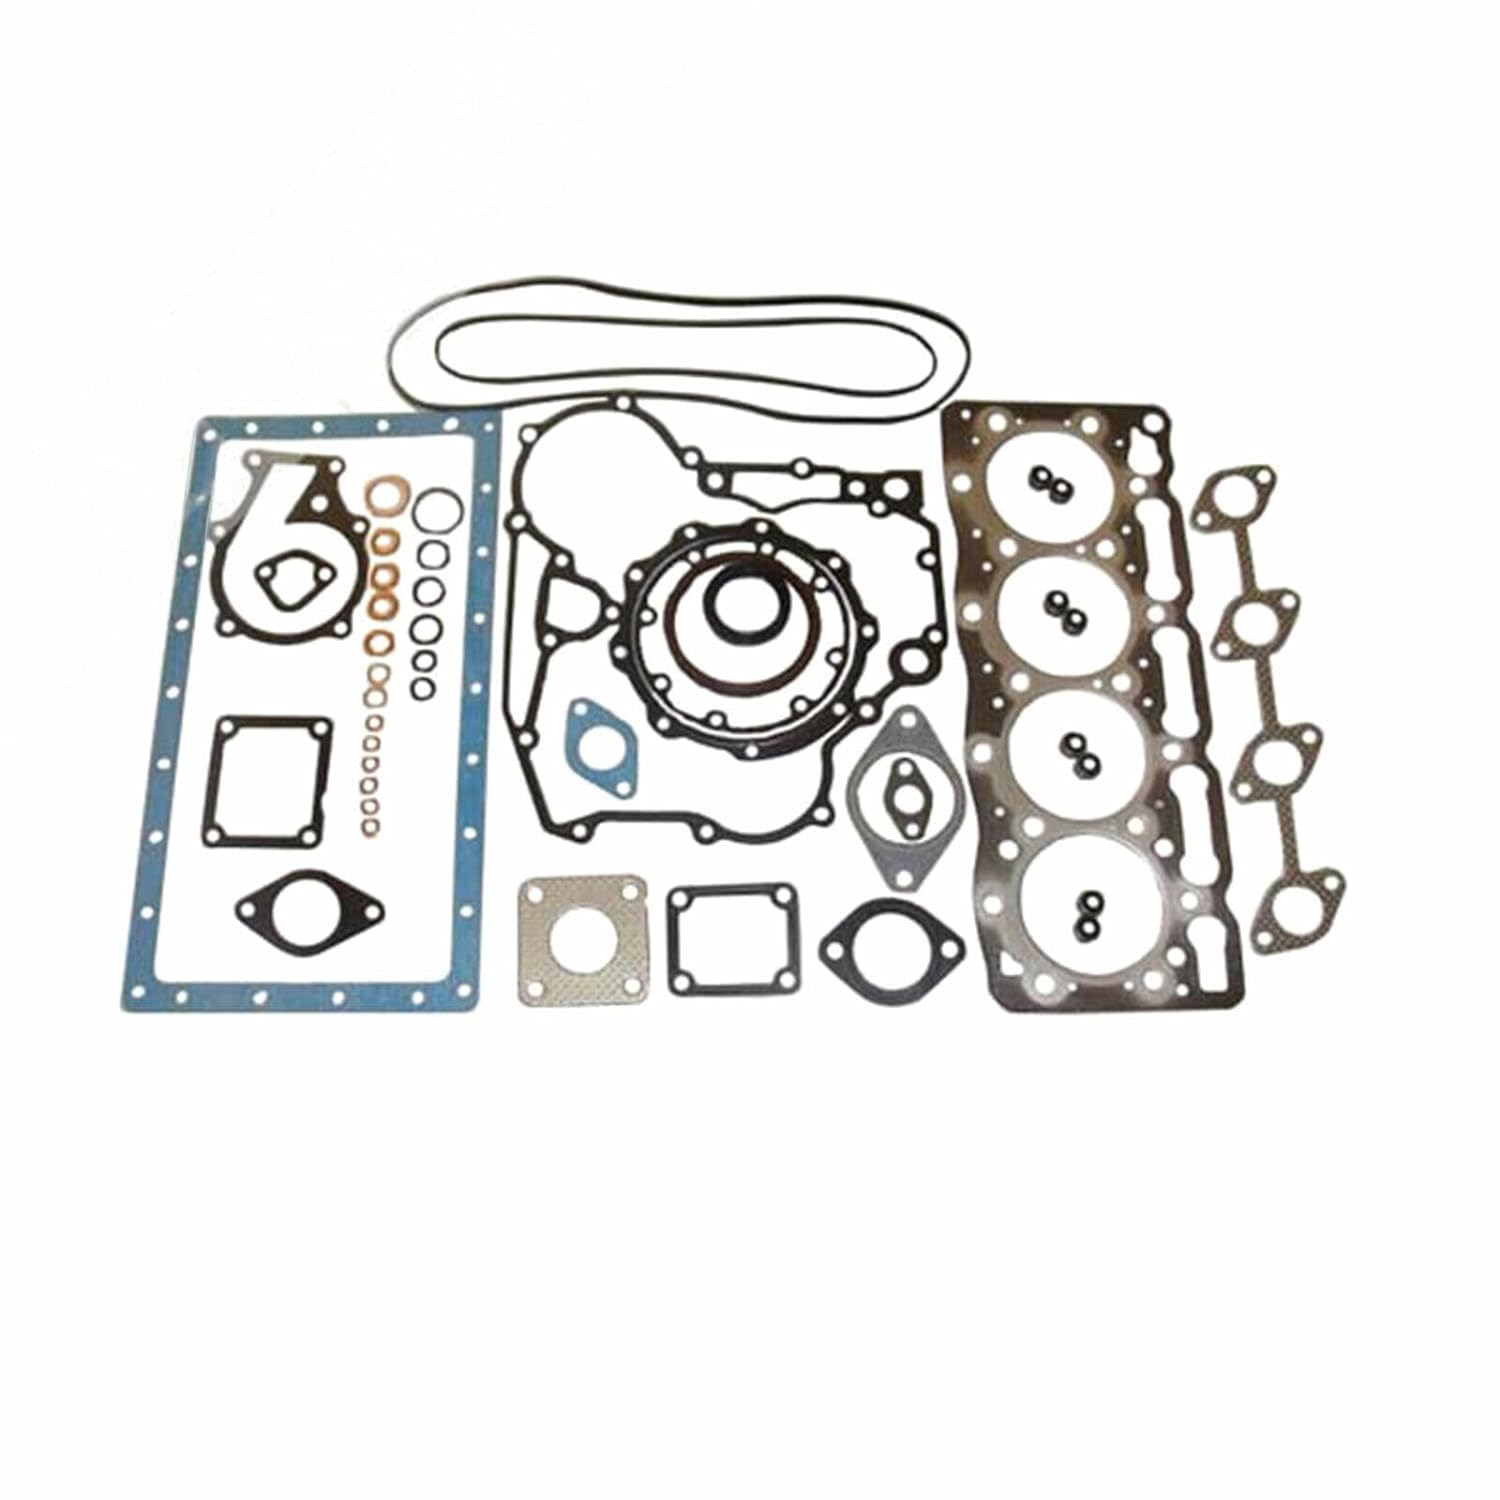 Complete Cylinder Head Assy+Full Gasket Kit Compatible with Kubota V1505T/B3200HSD - KUDUPARTS